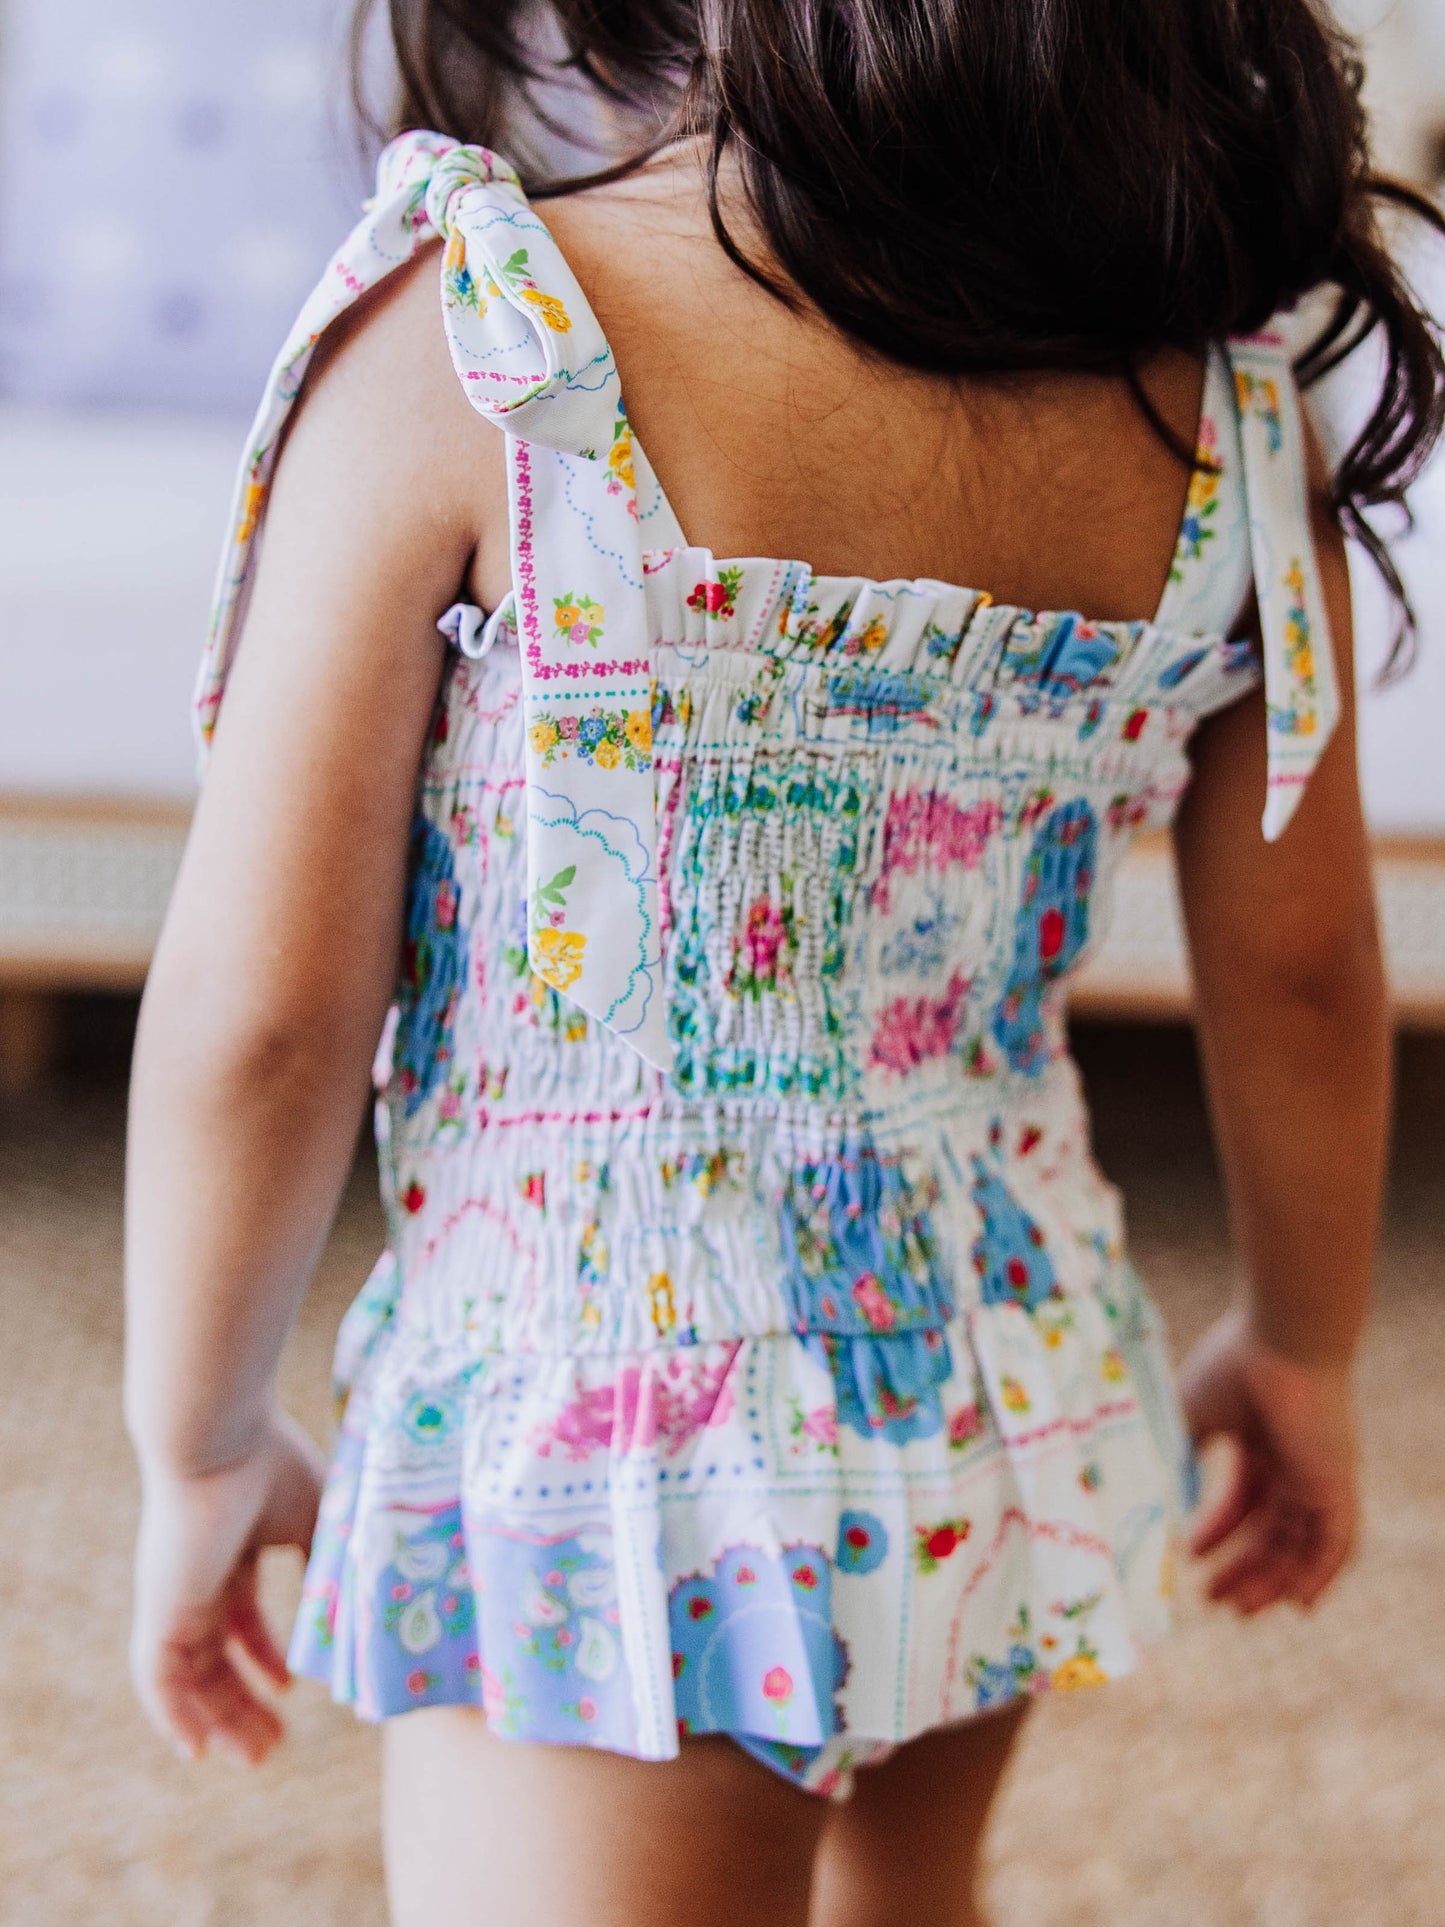 Smocked One Piece - Spring Patchwork